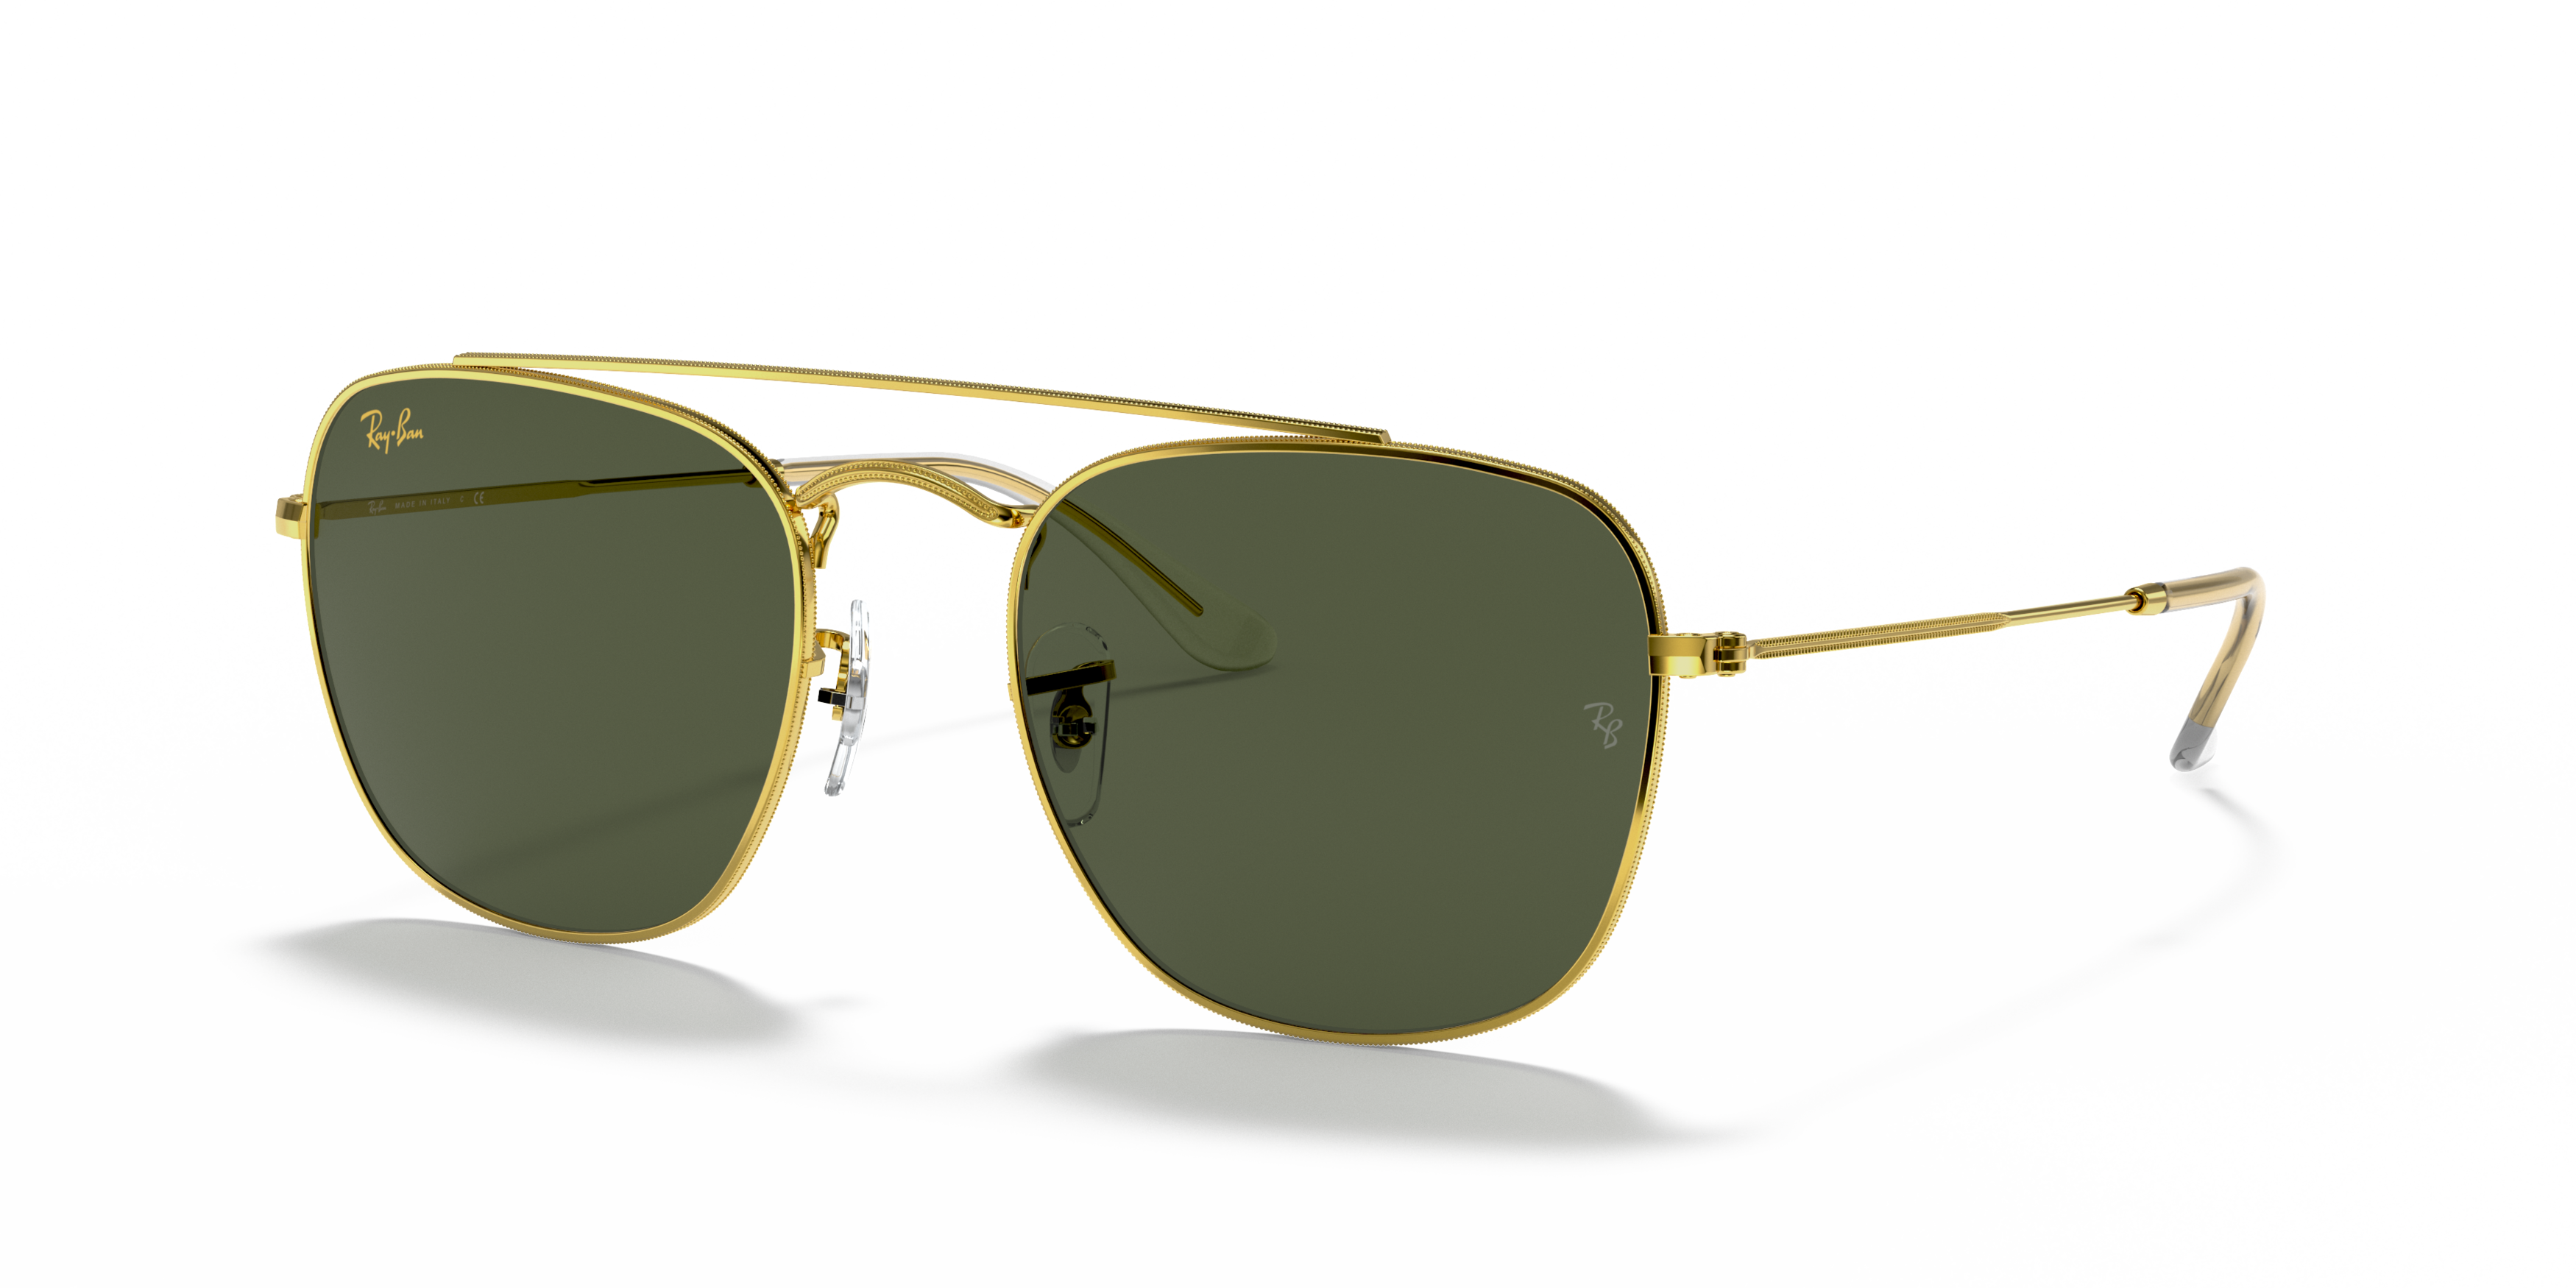 Angle_Left01 Ray-Ban Frank Legend Gold RB3557 919631 Groen / Goud